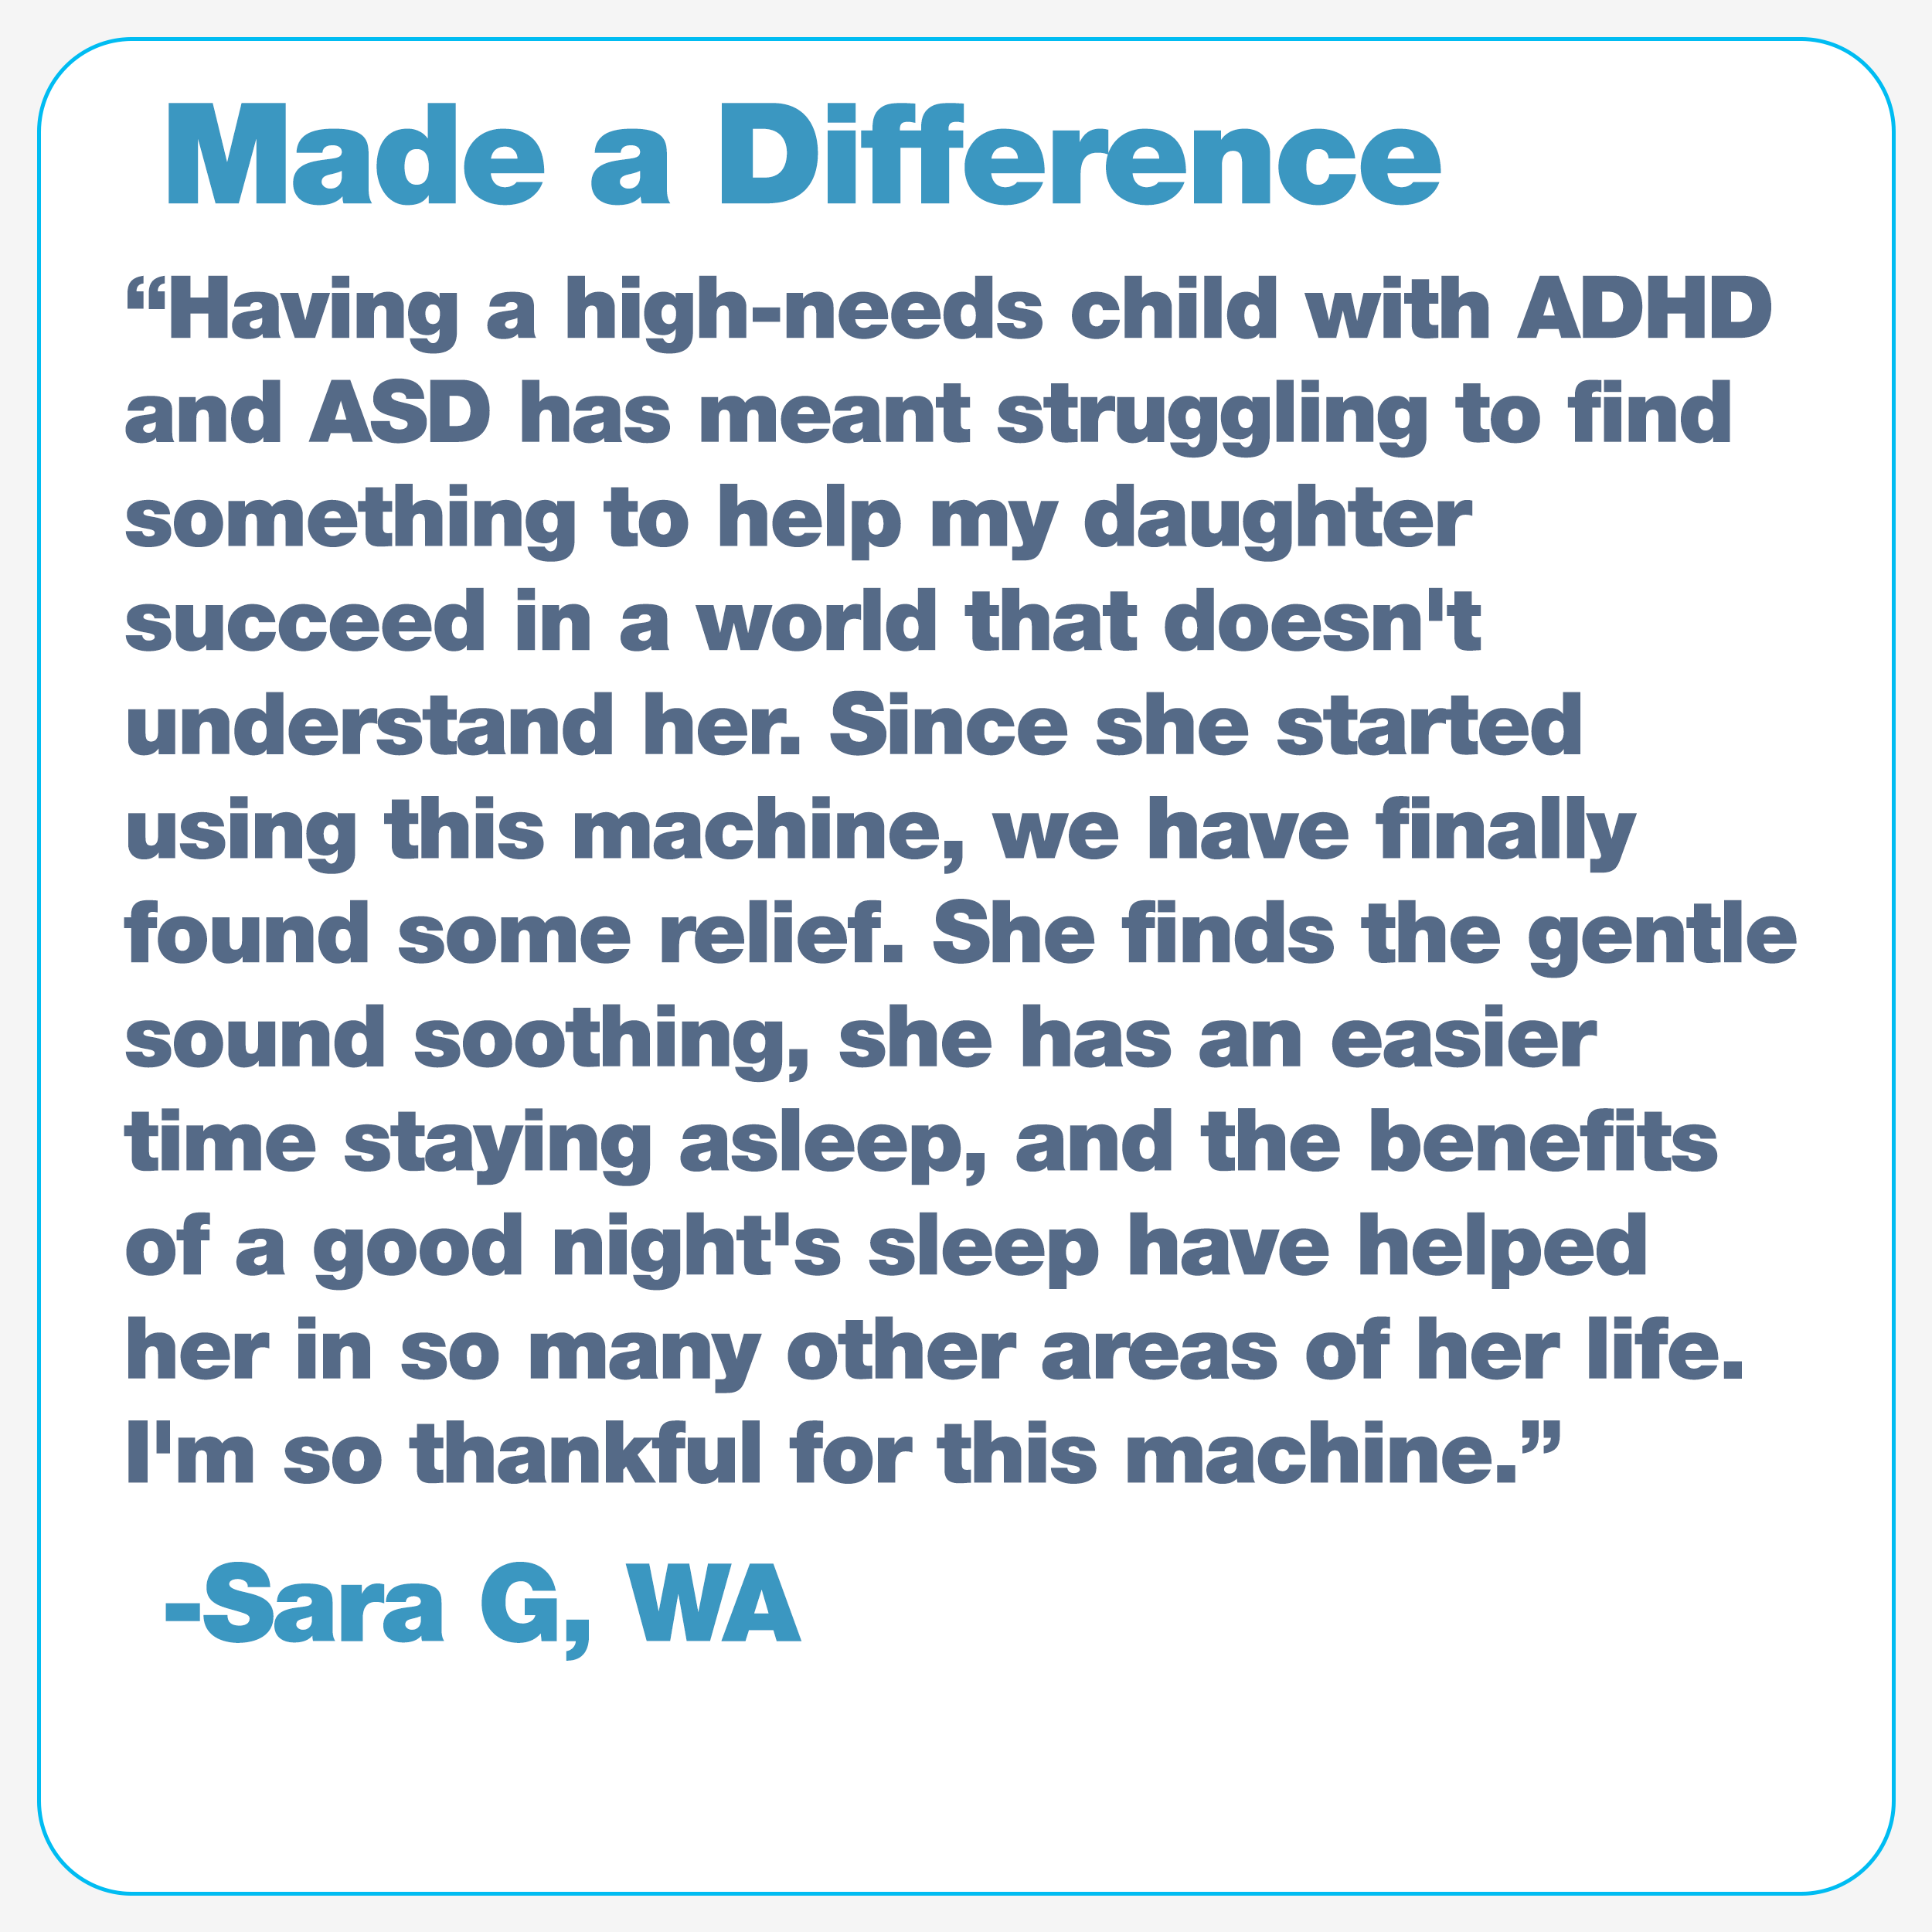 Sara G. Testimonial: Made a difference for child with ADHD and ASD